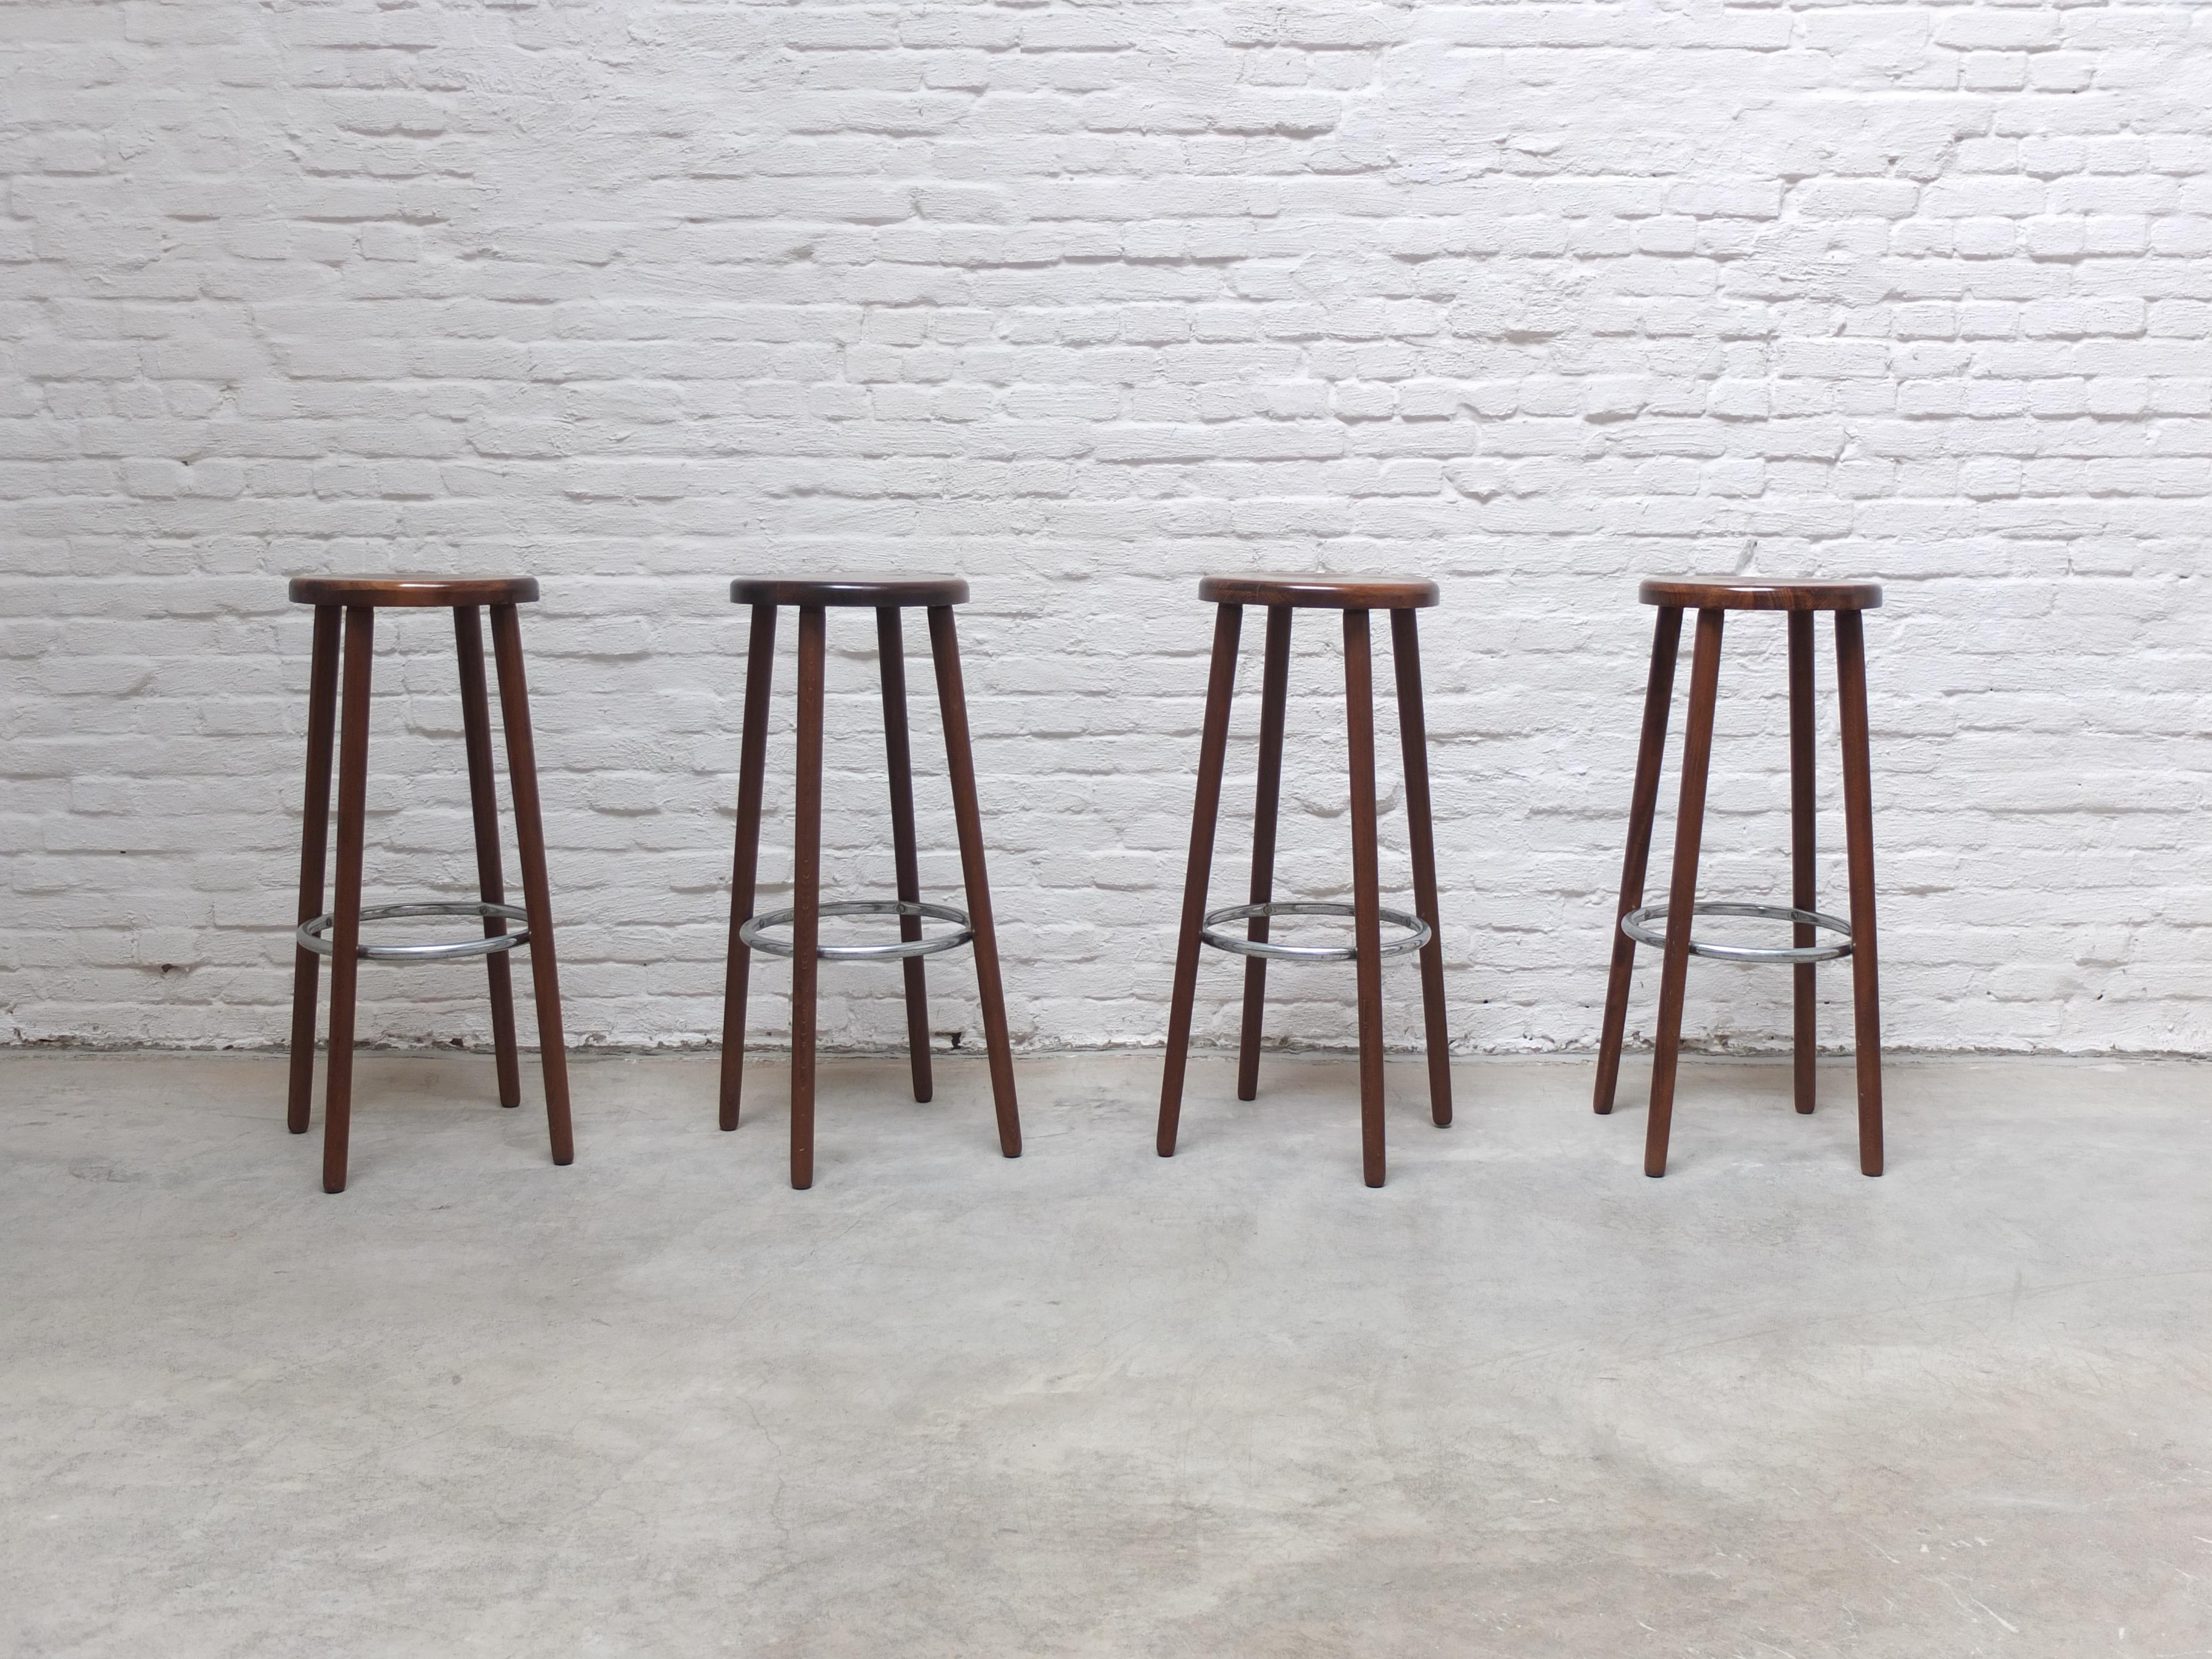 A lovely set of of 4 bar stools produced in Denmark during the 1960s. Very well-crafted elegant design and made of solid teak with a metal ring-shaped footrest. It’s not often we come across nice bar stools but this set stands out thanks to the